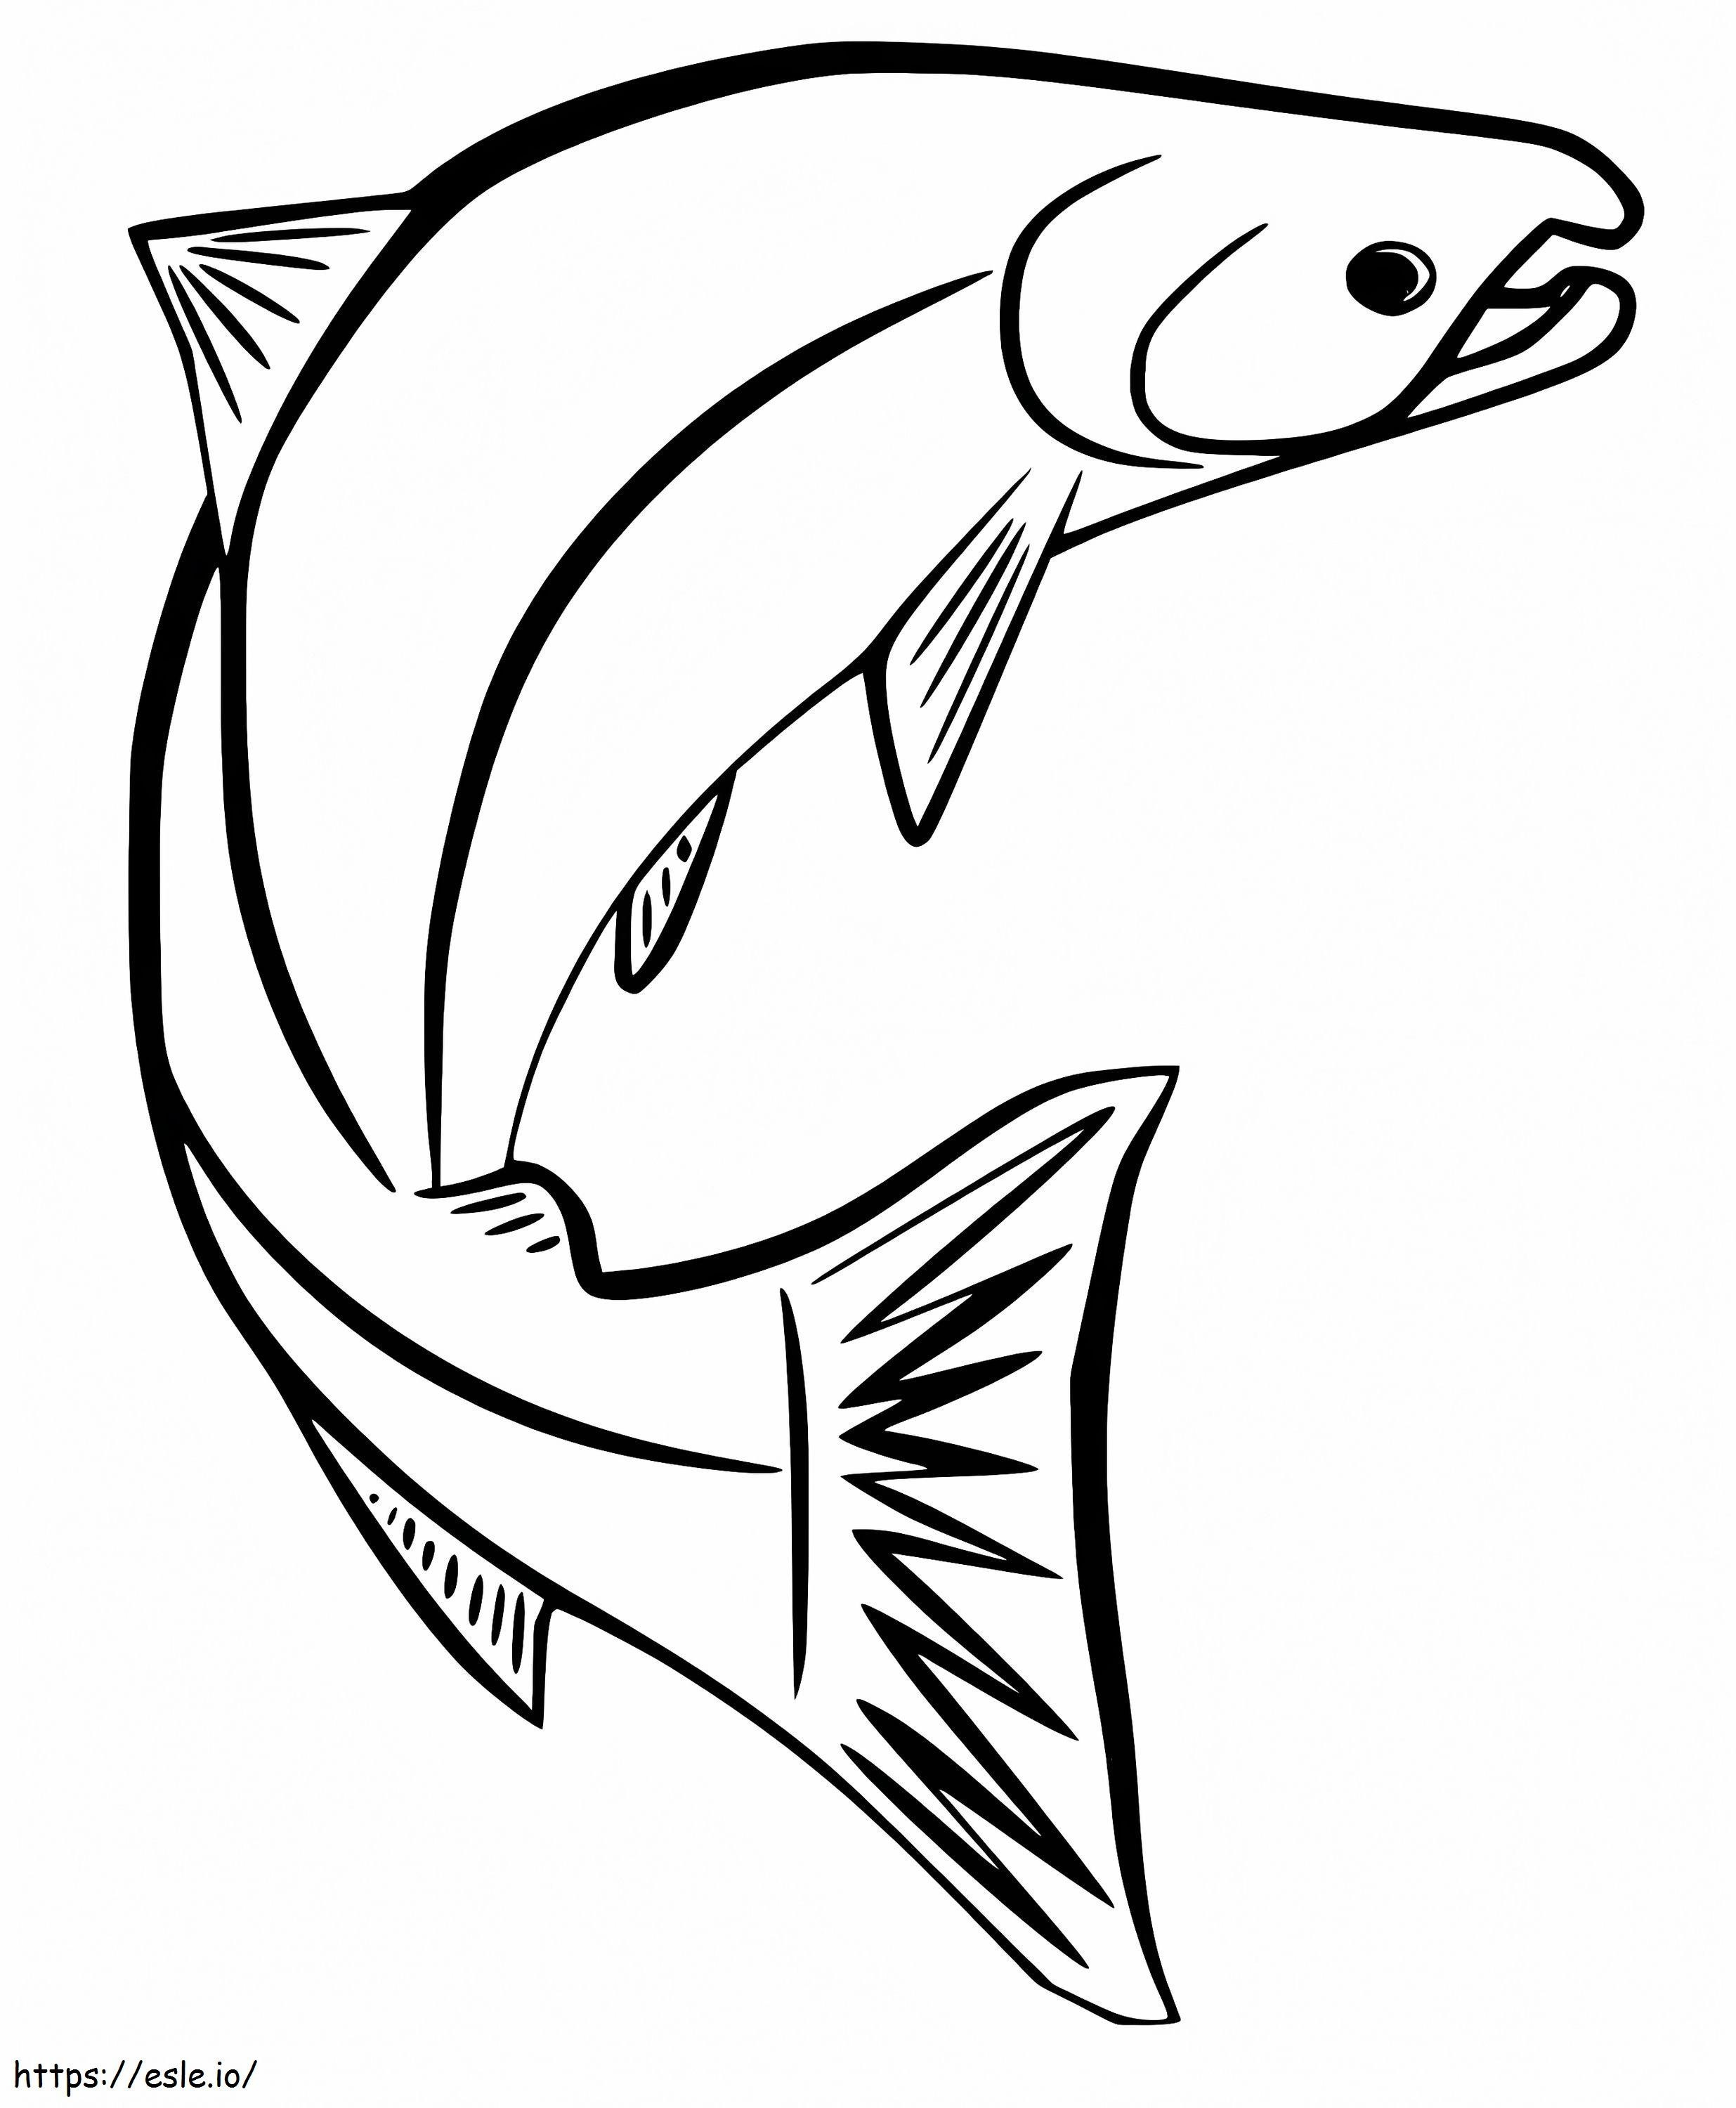 Salmon Jumps coloring page